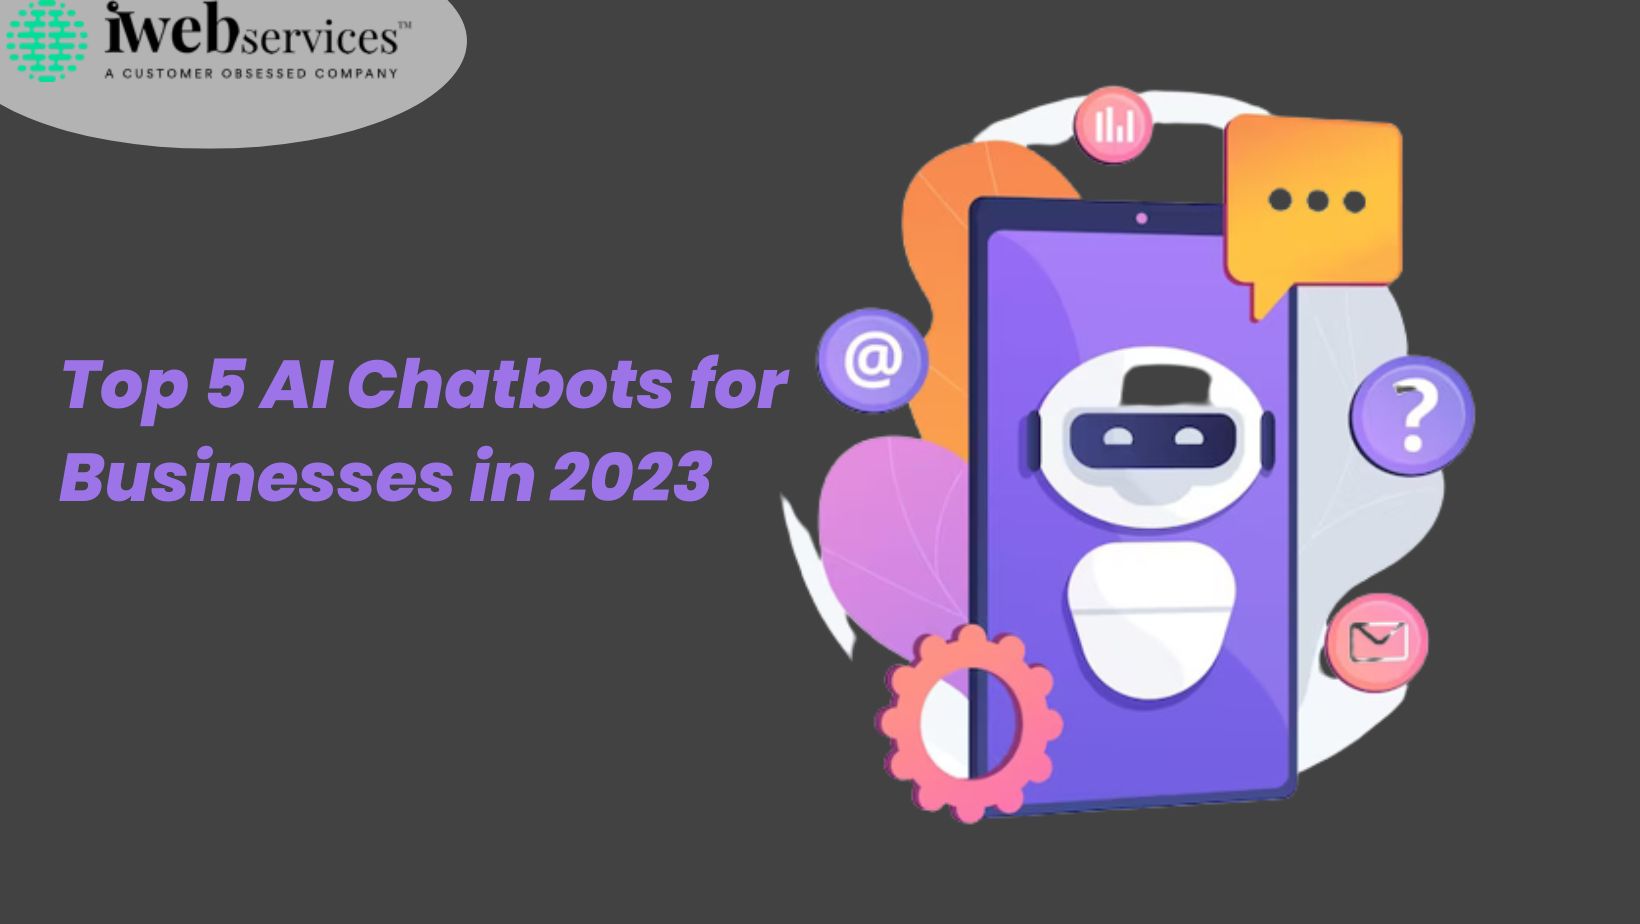 Top 5 AI Chatbots for Businesses in 2023